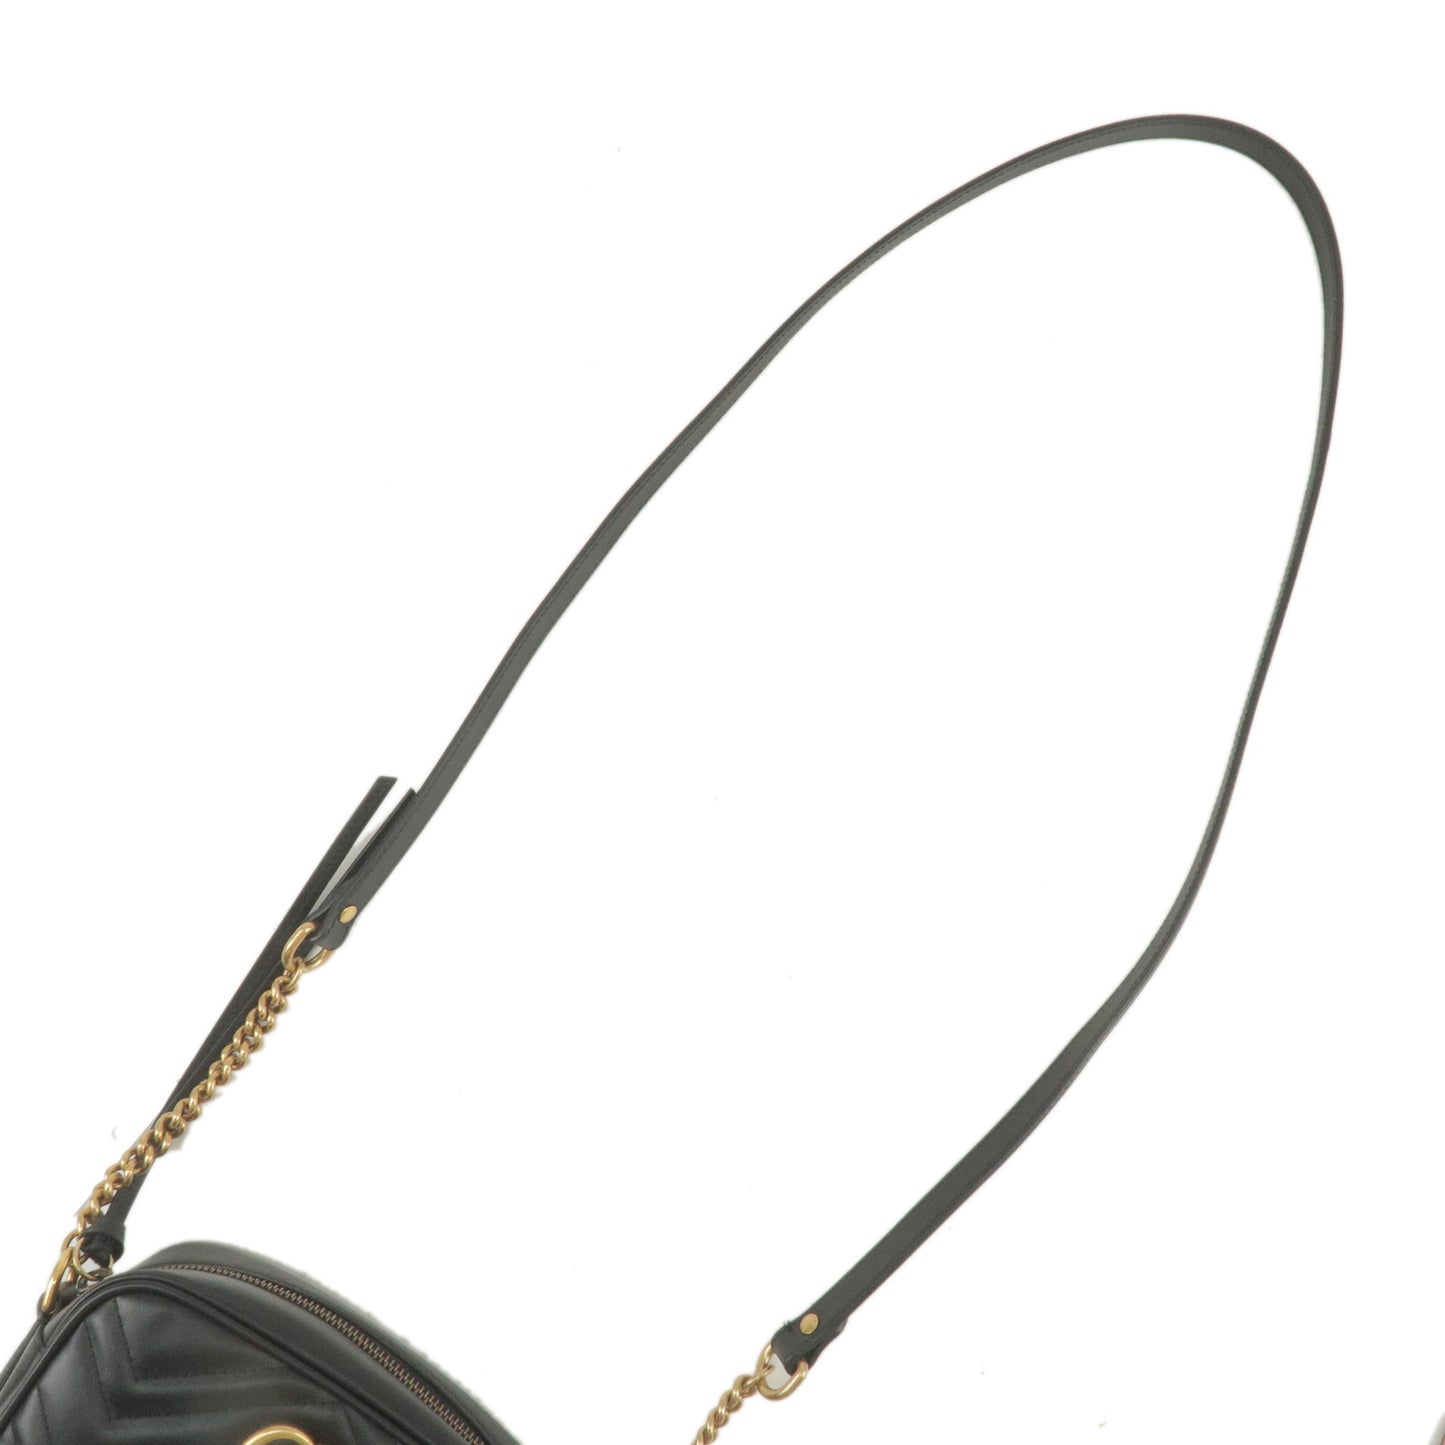 GUCCI GG Marmont Leather Chain Shouder Bag Black 448065